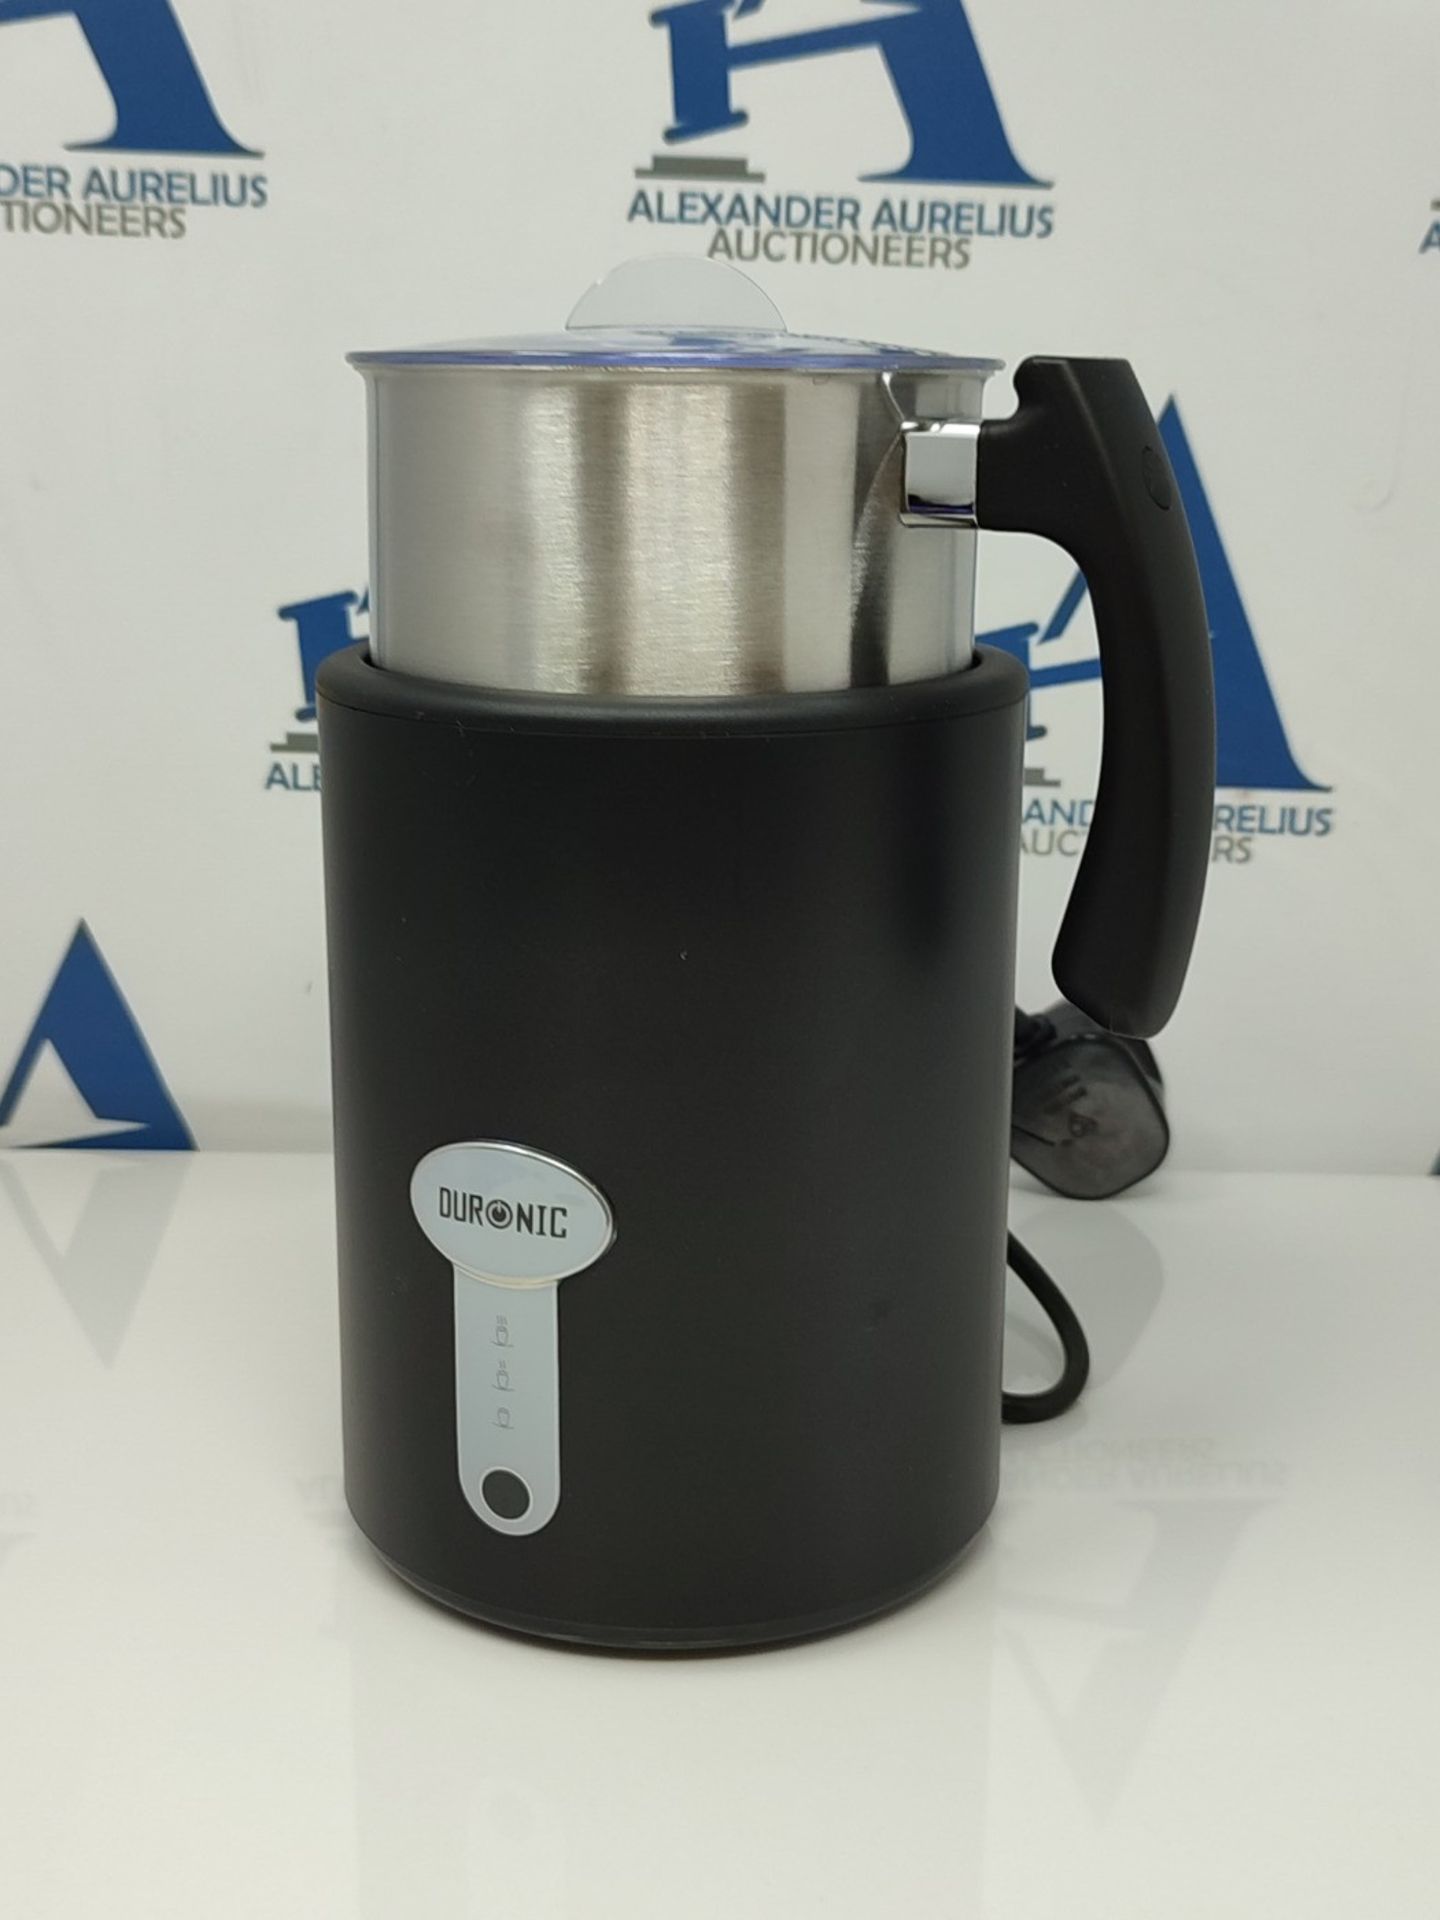 Duronic MF500 BK Milk Frother - 500ml Stainless-Steel Milk Frother Jug, Electric Steam - Image 3 of 3